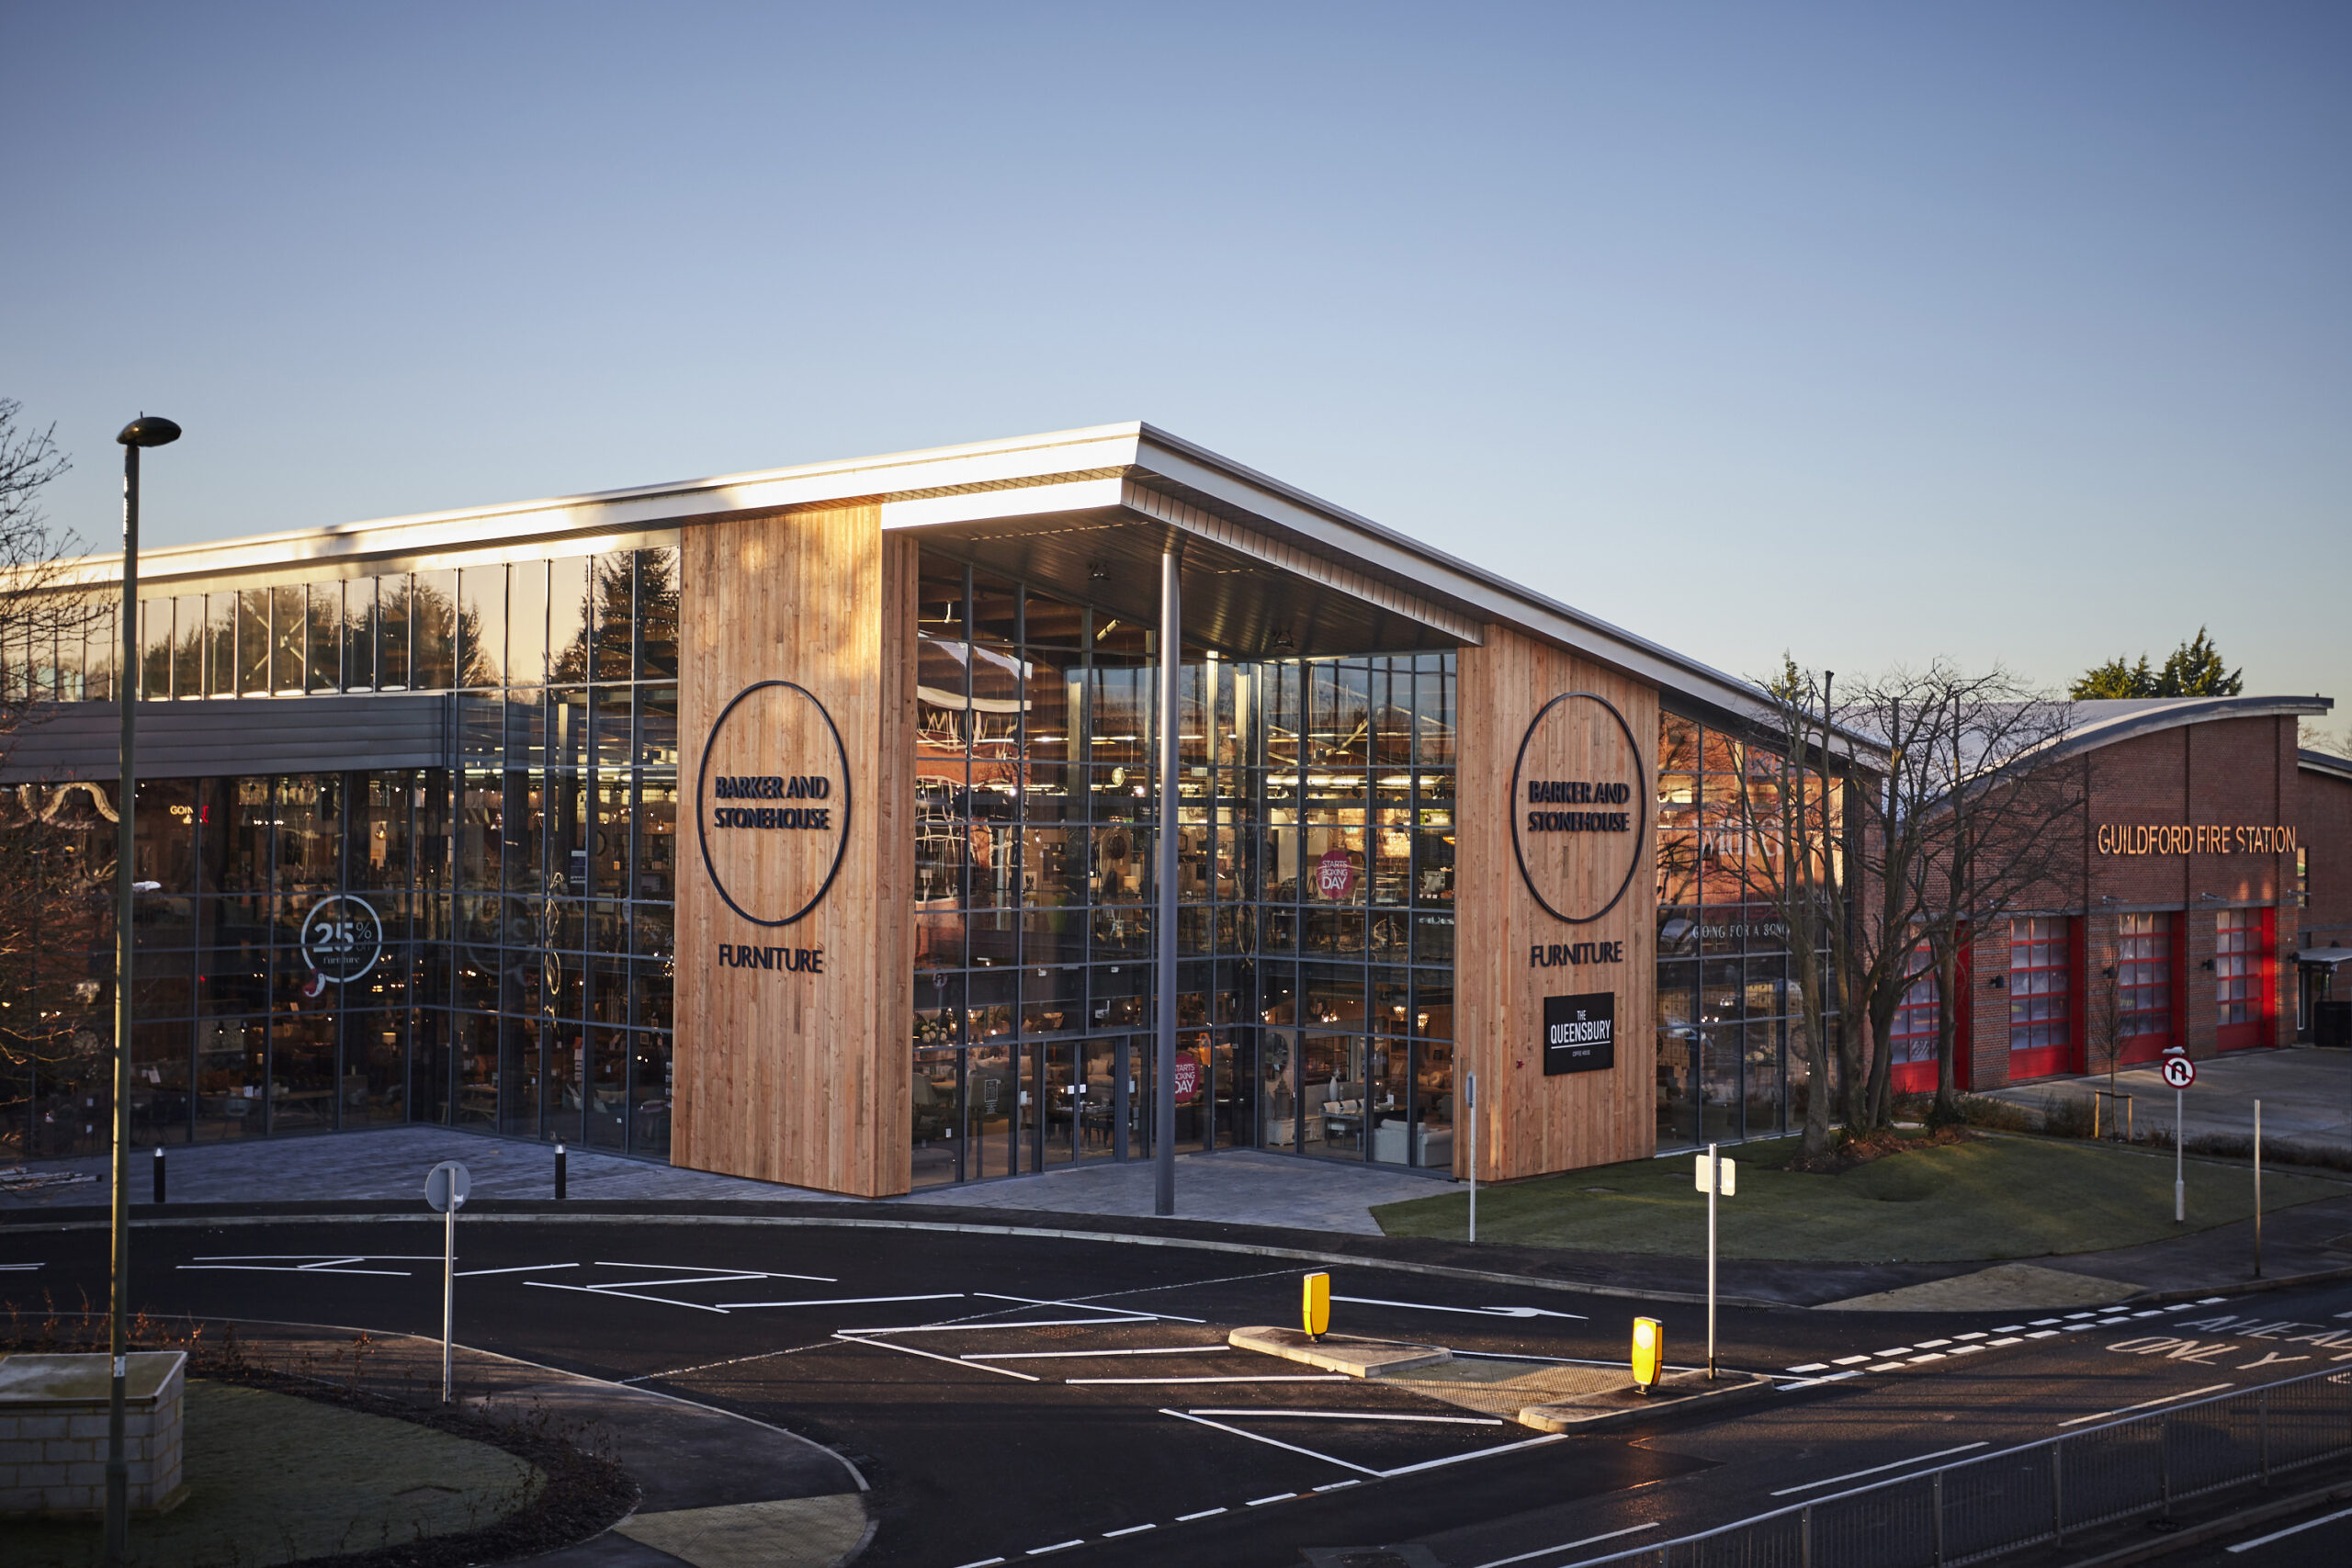 Barker and Stonehouse's Guildford Store